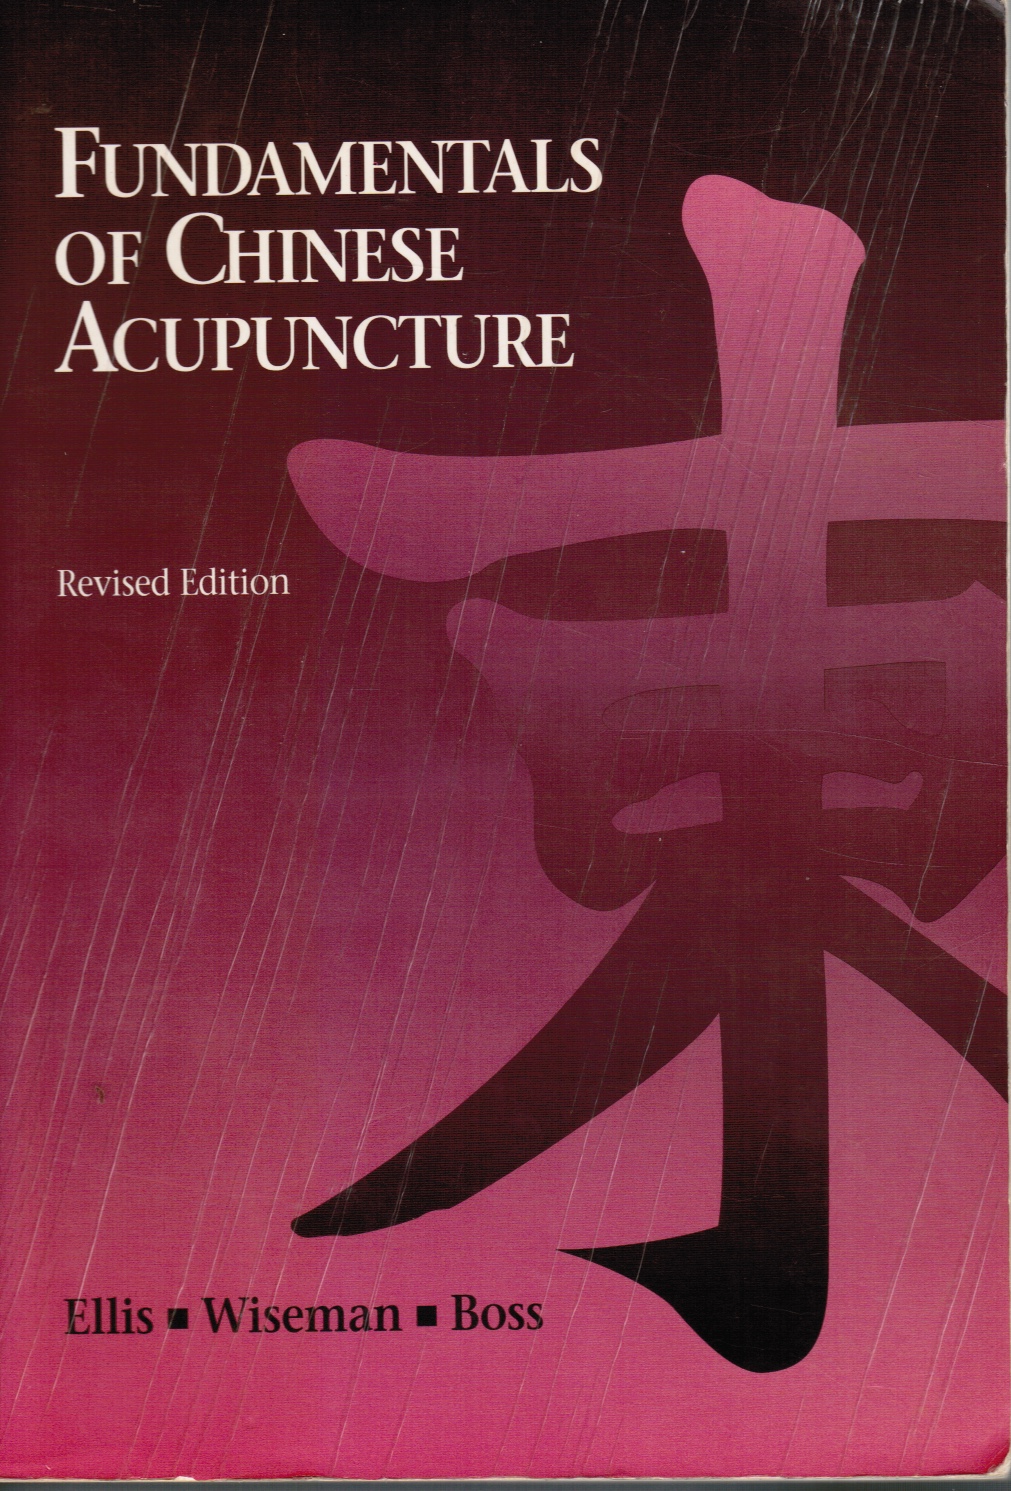 ELLS, WISEMAN, BOSS - Fundamentals of Chinese Acupuncture